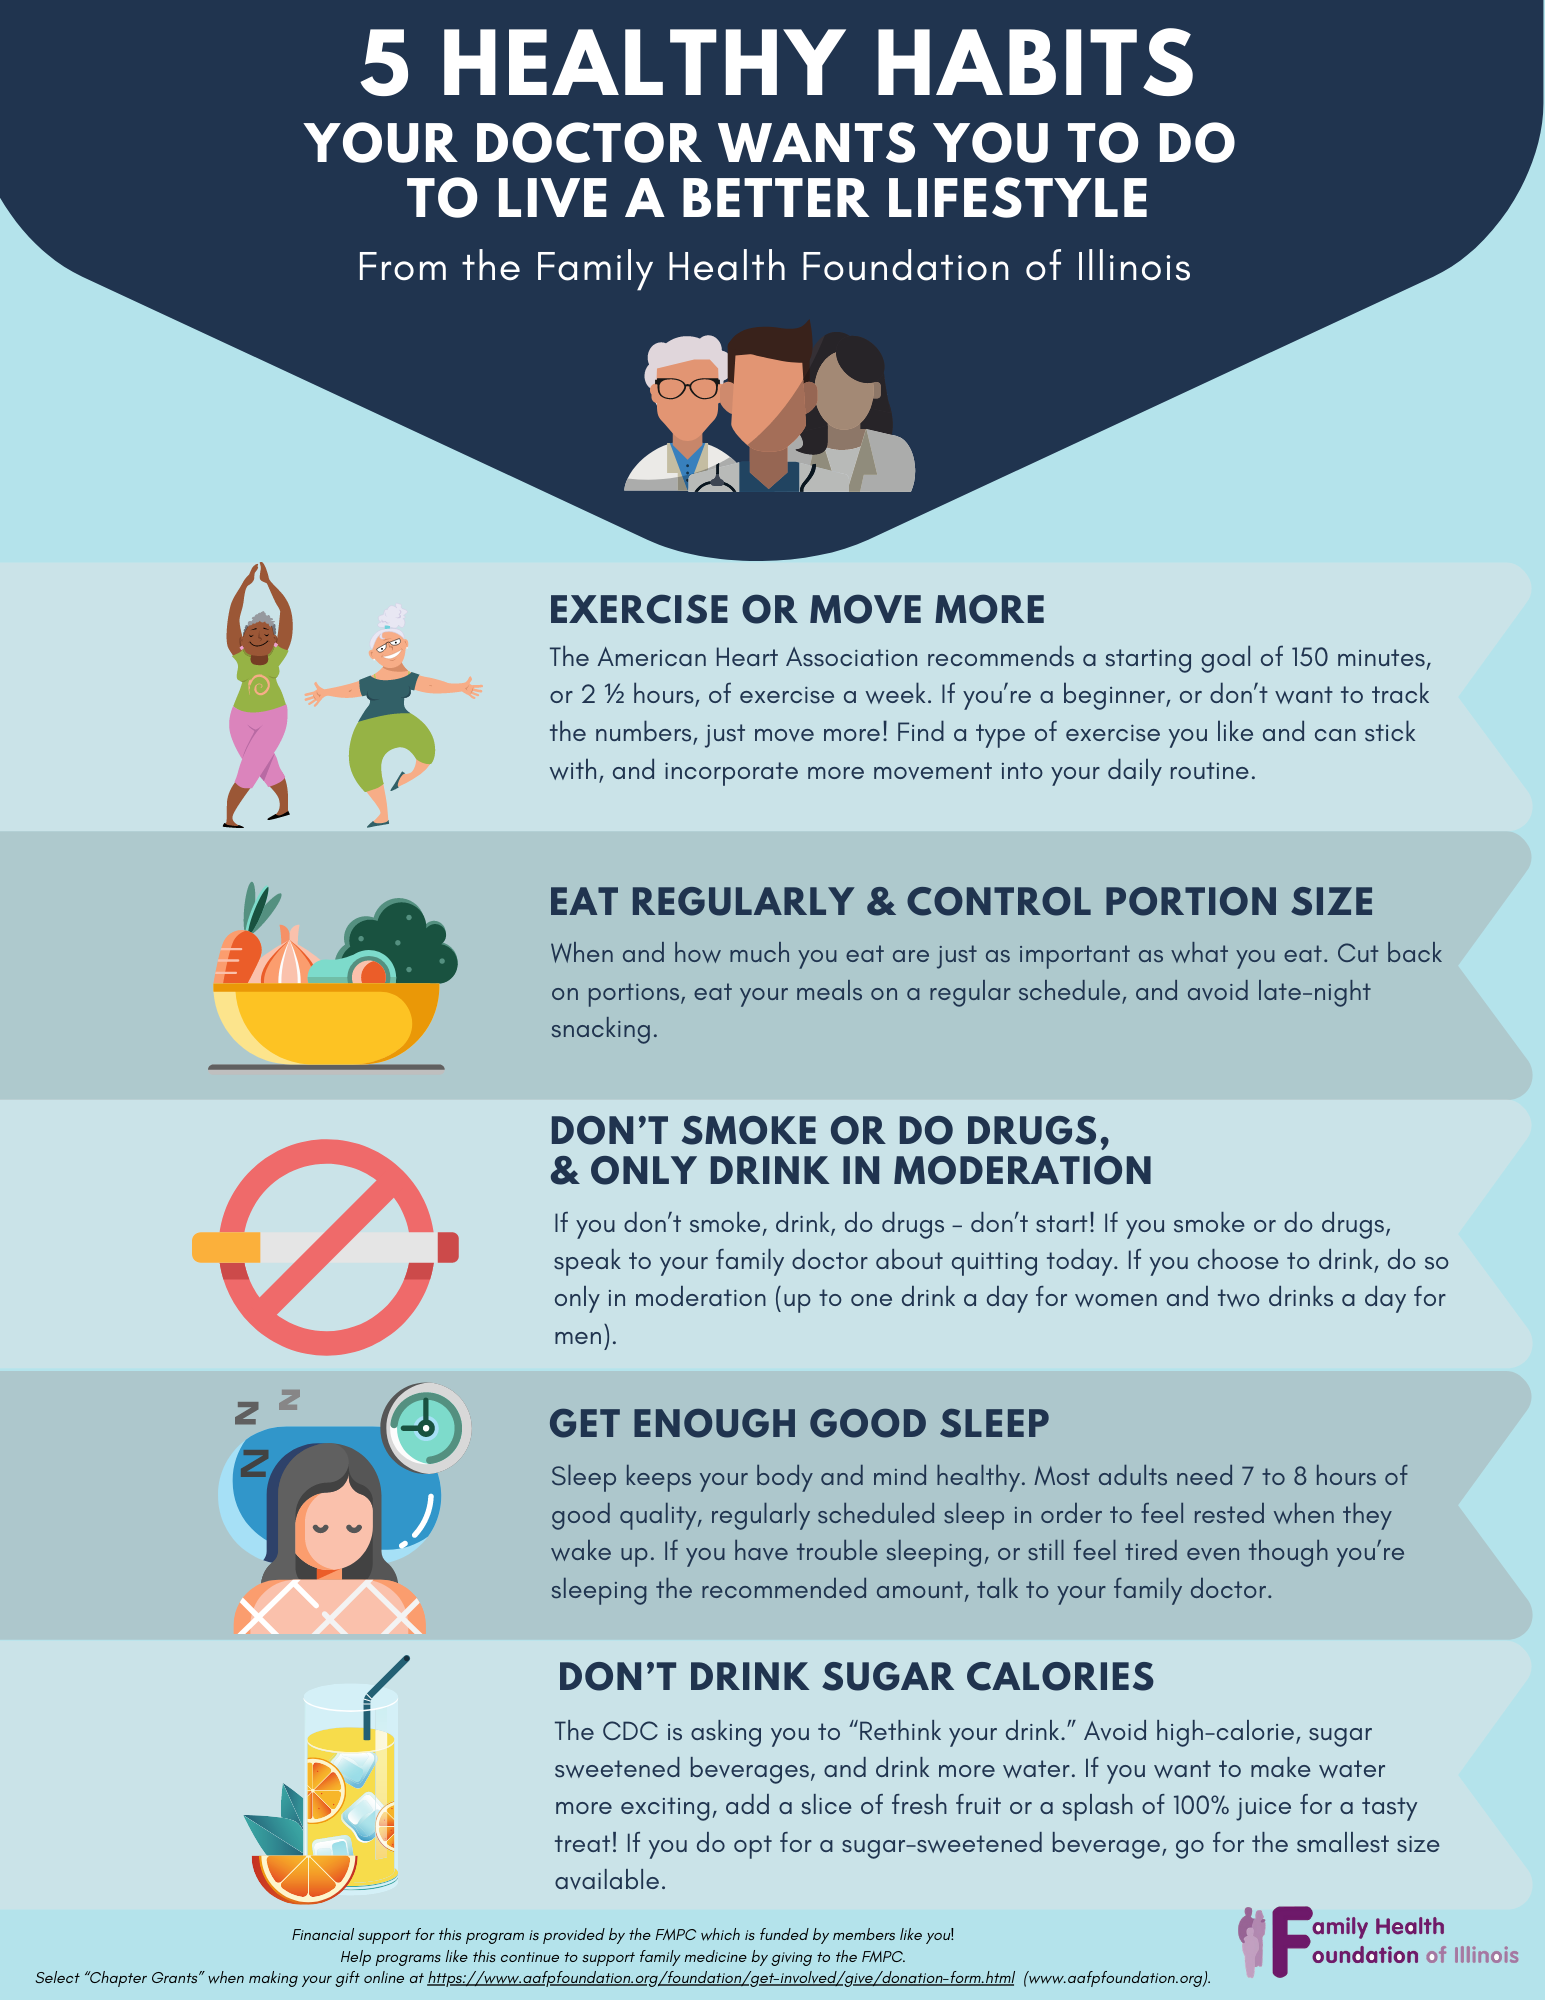 14 Steps to a Healthy Lifestyle - OakBend Medical Center